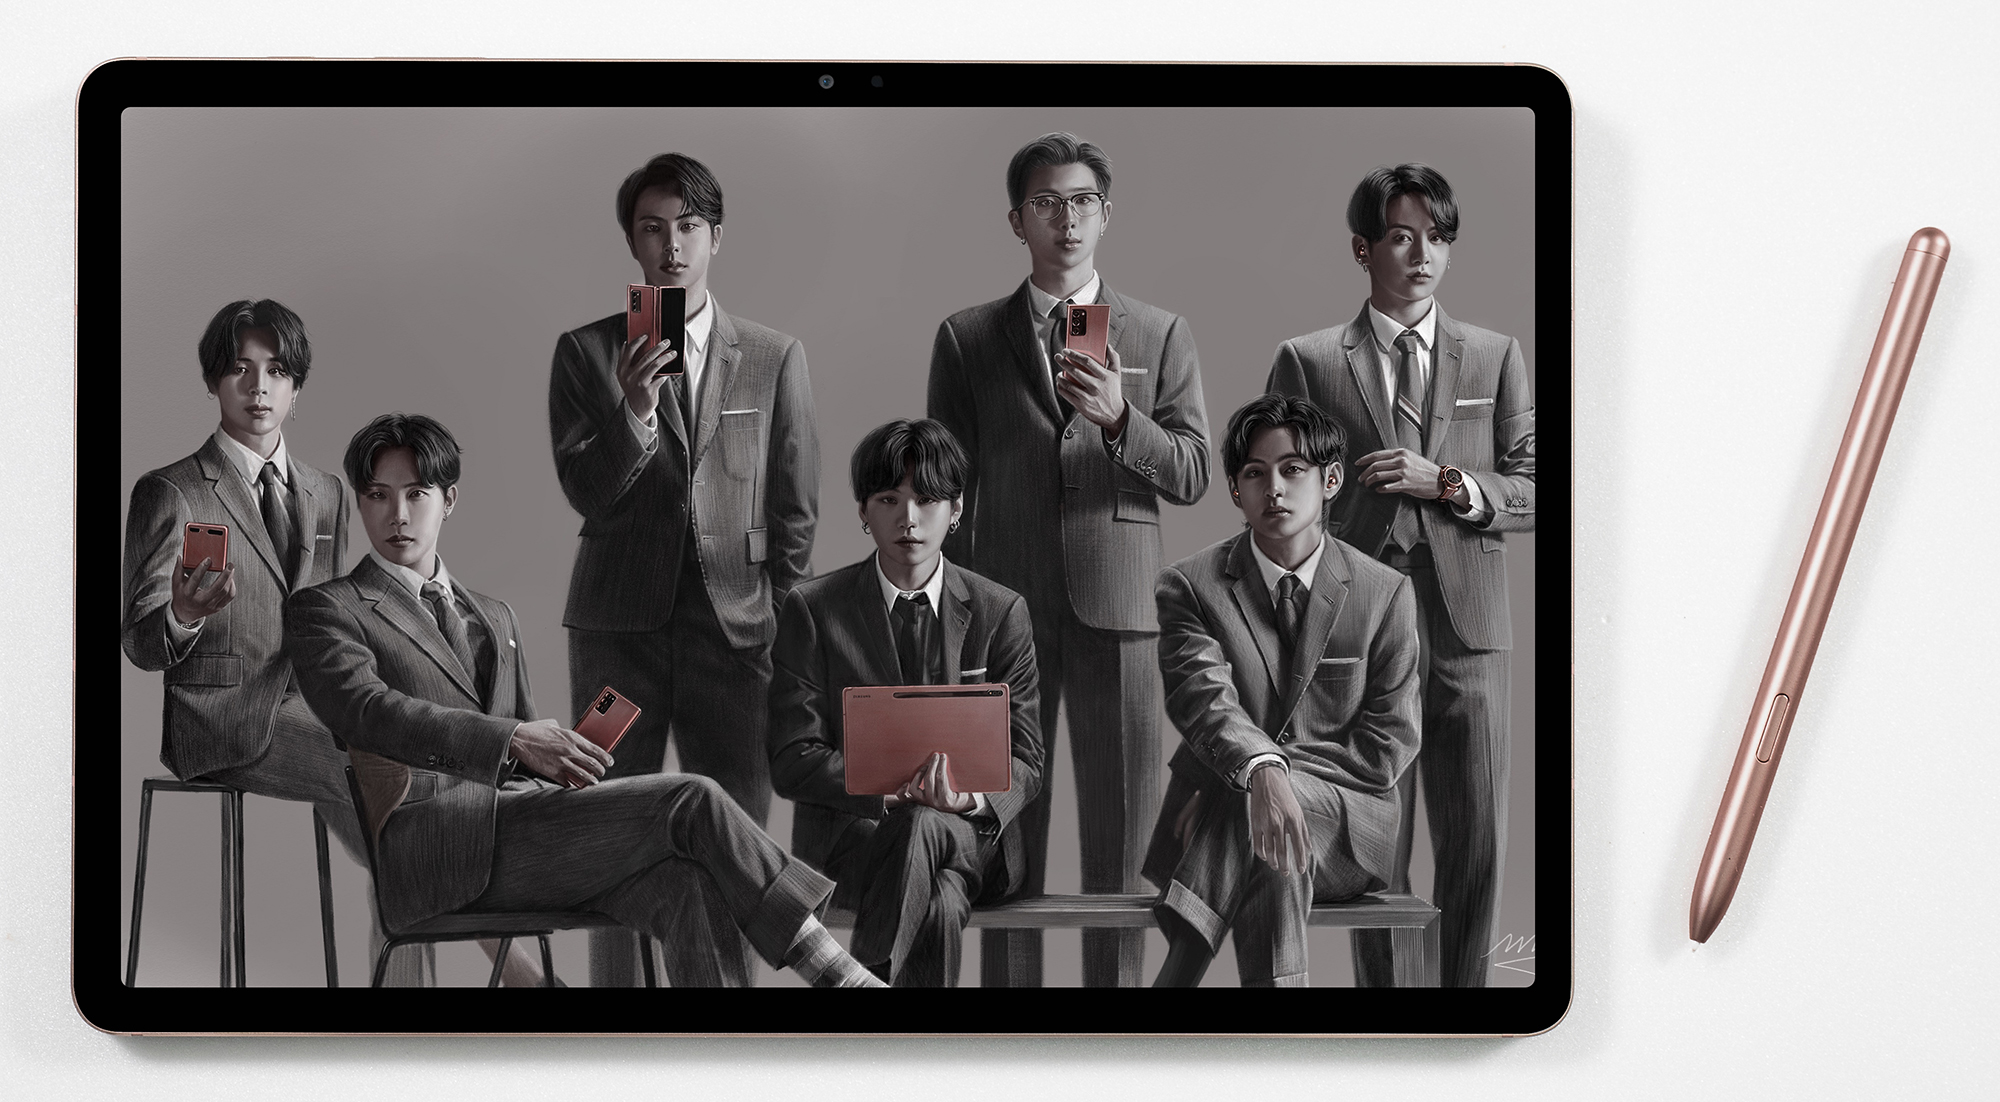 A Galaxy Tab S7+ with an S Pen beside it shows a digitally-drawn image of BTS with the latest Galaxy products.